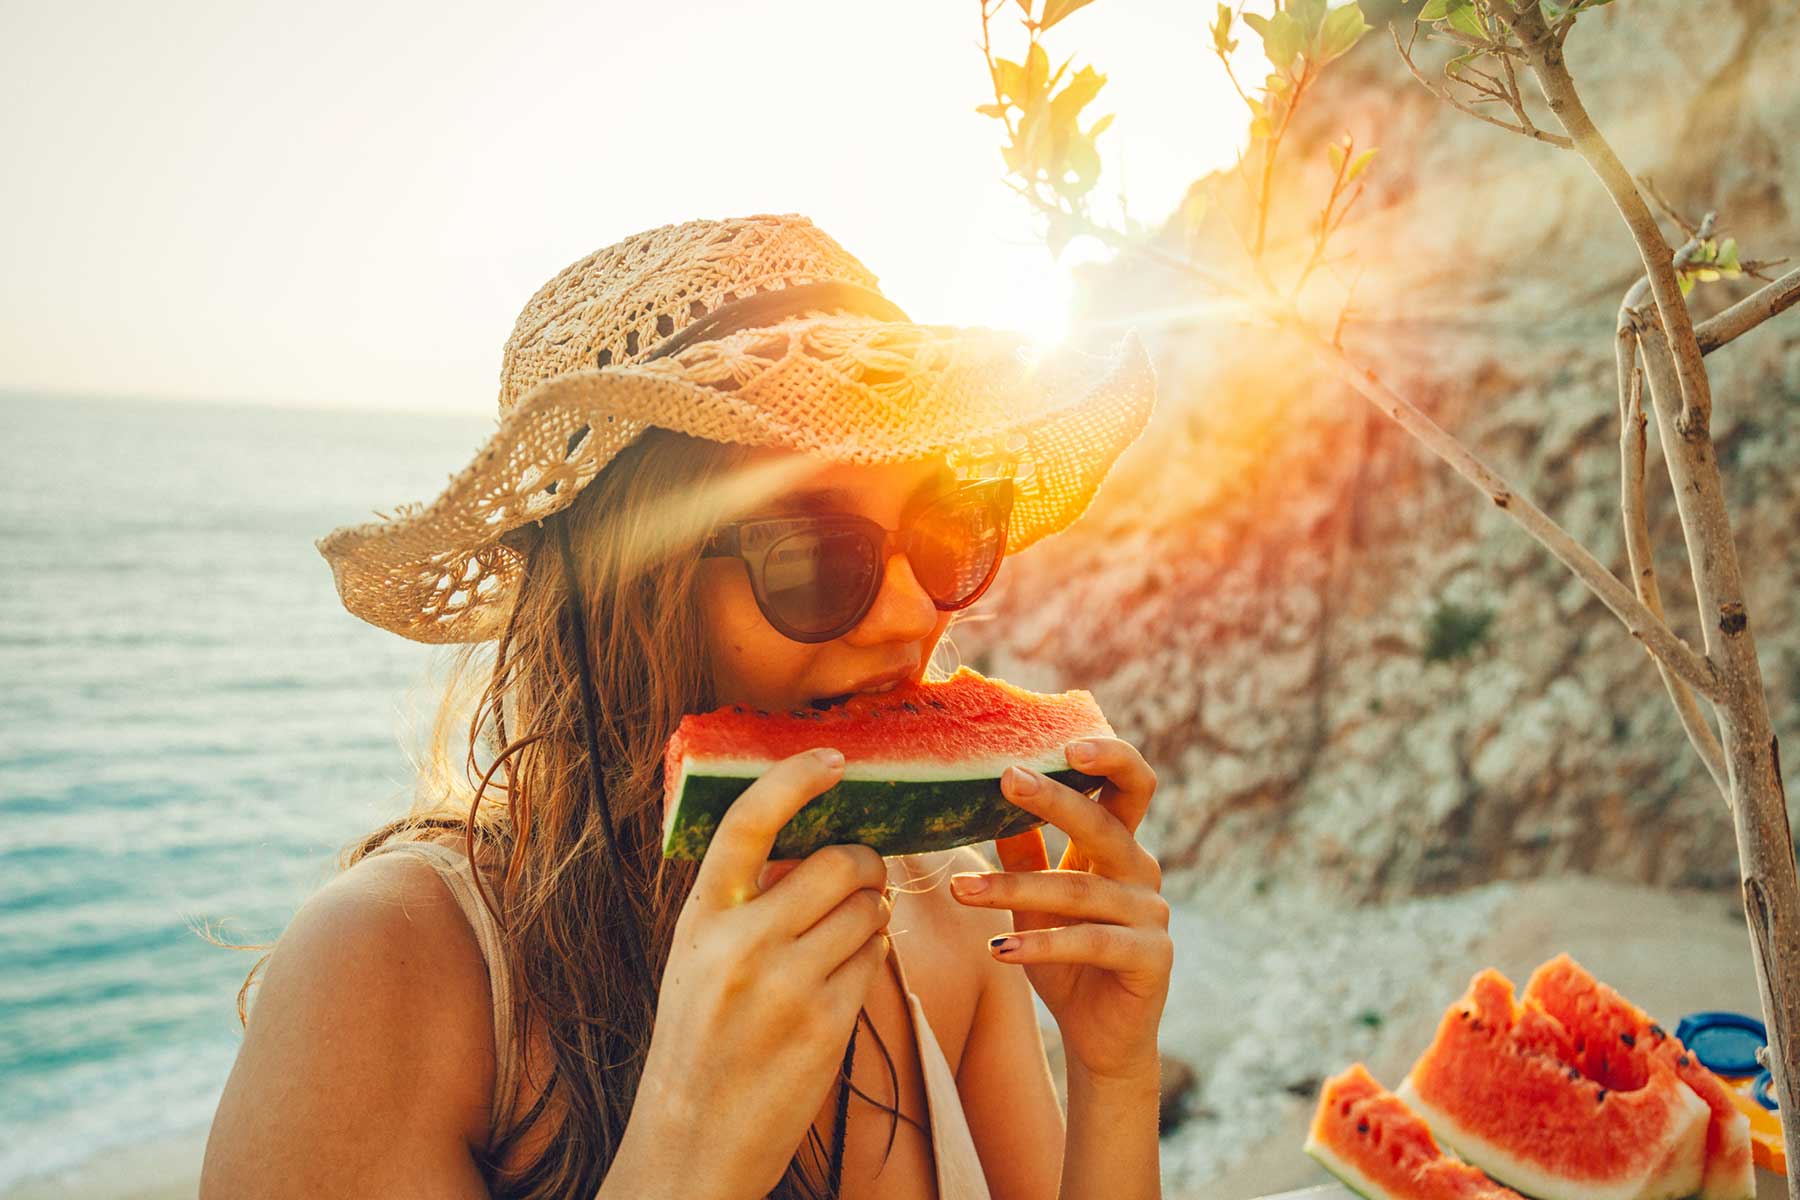 Healthy tips for summertime adventures